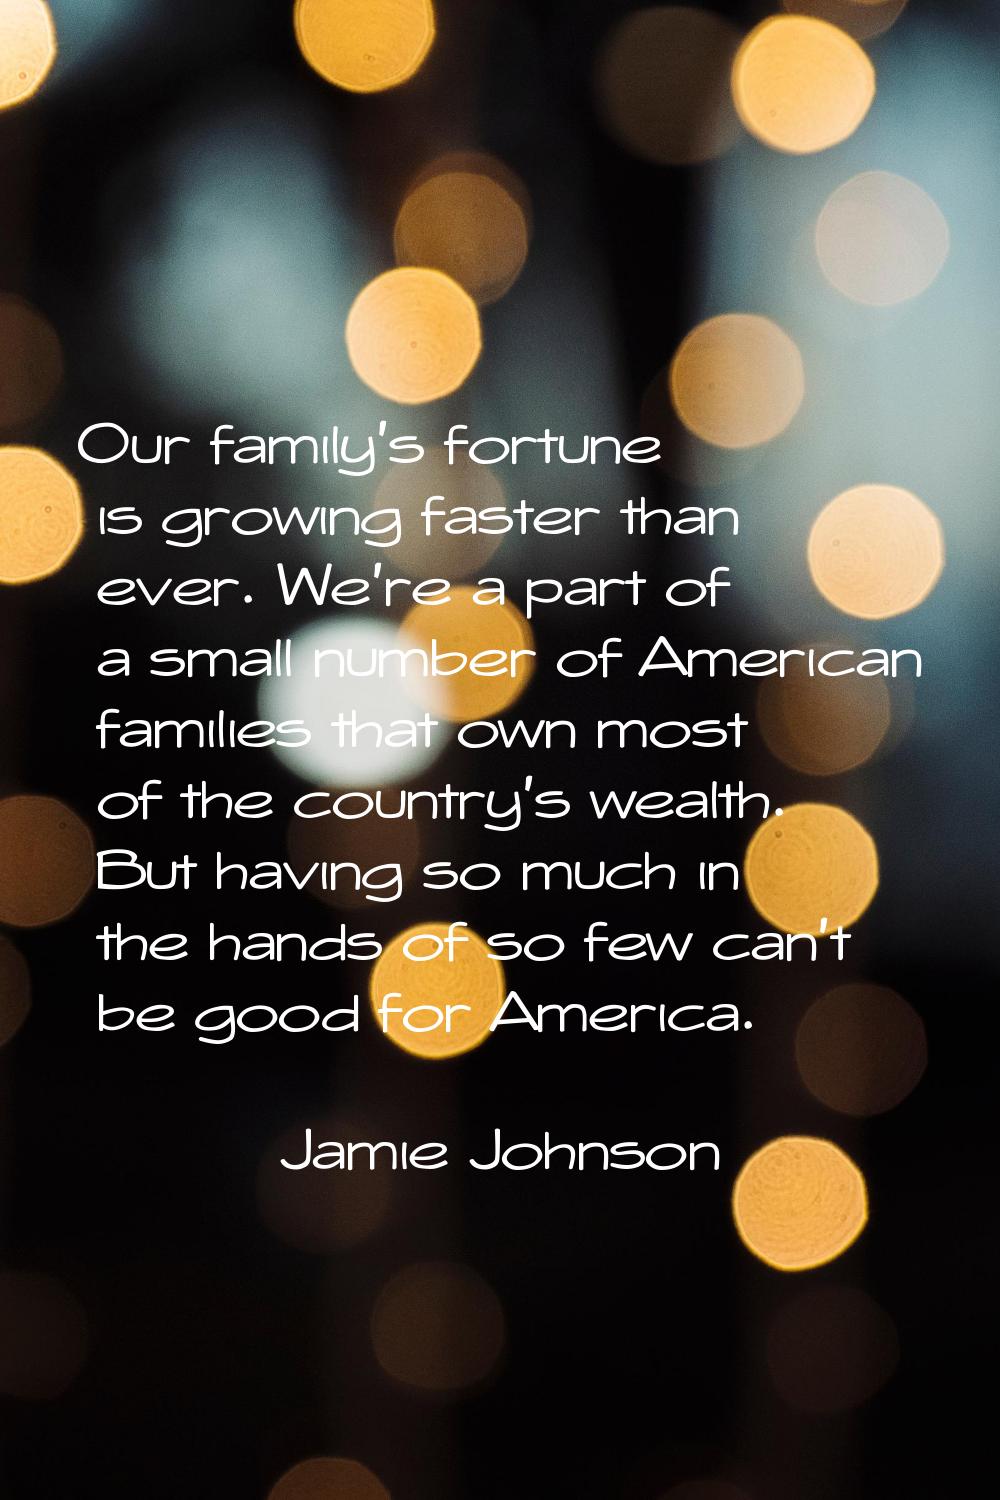 Our family's fortune is growing faster than ever. We're a part of a small number of American famili